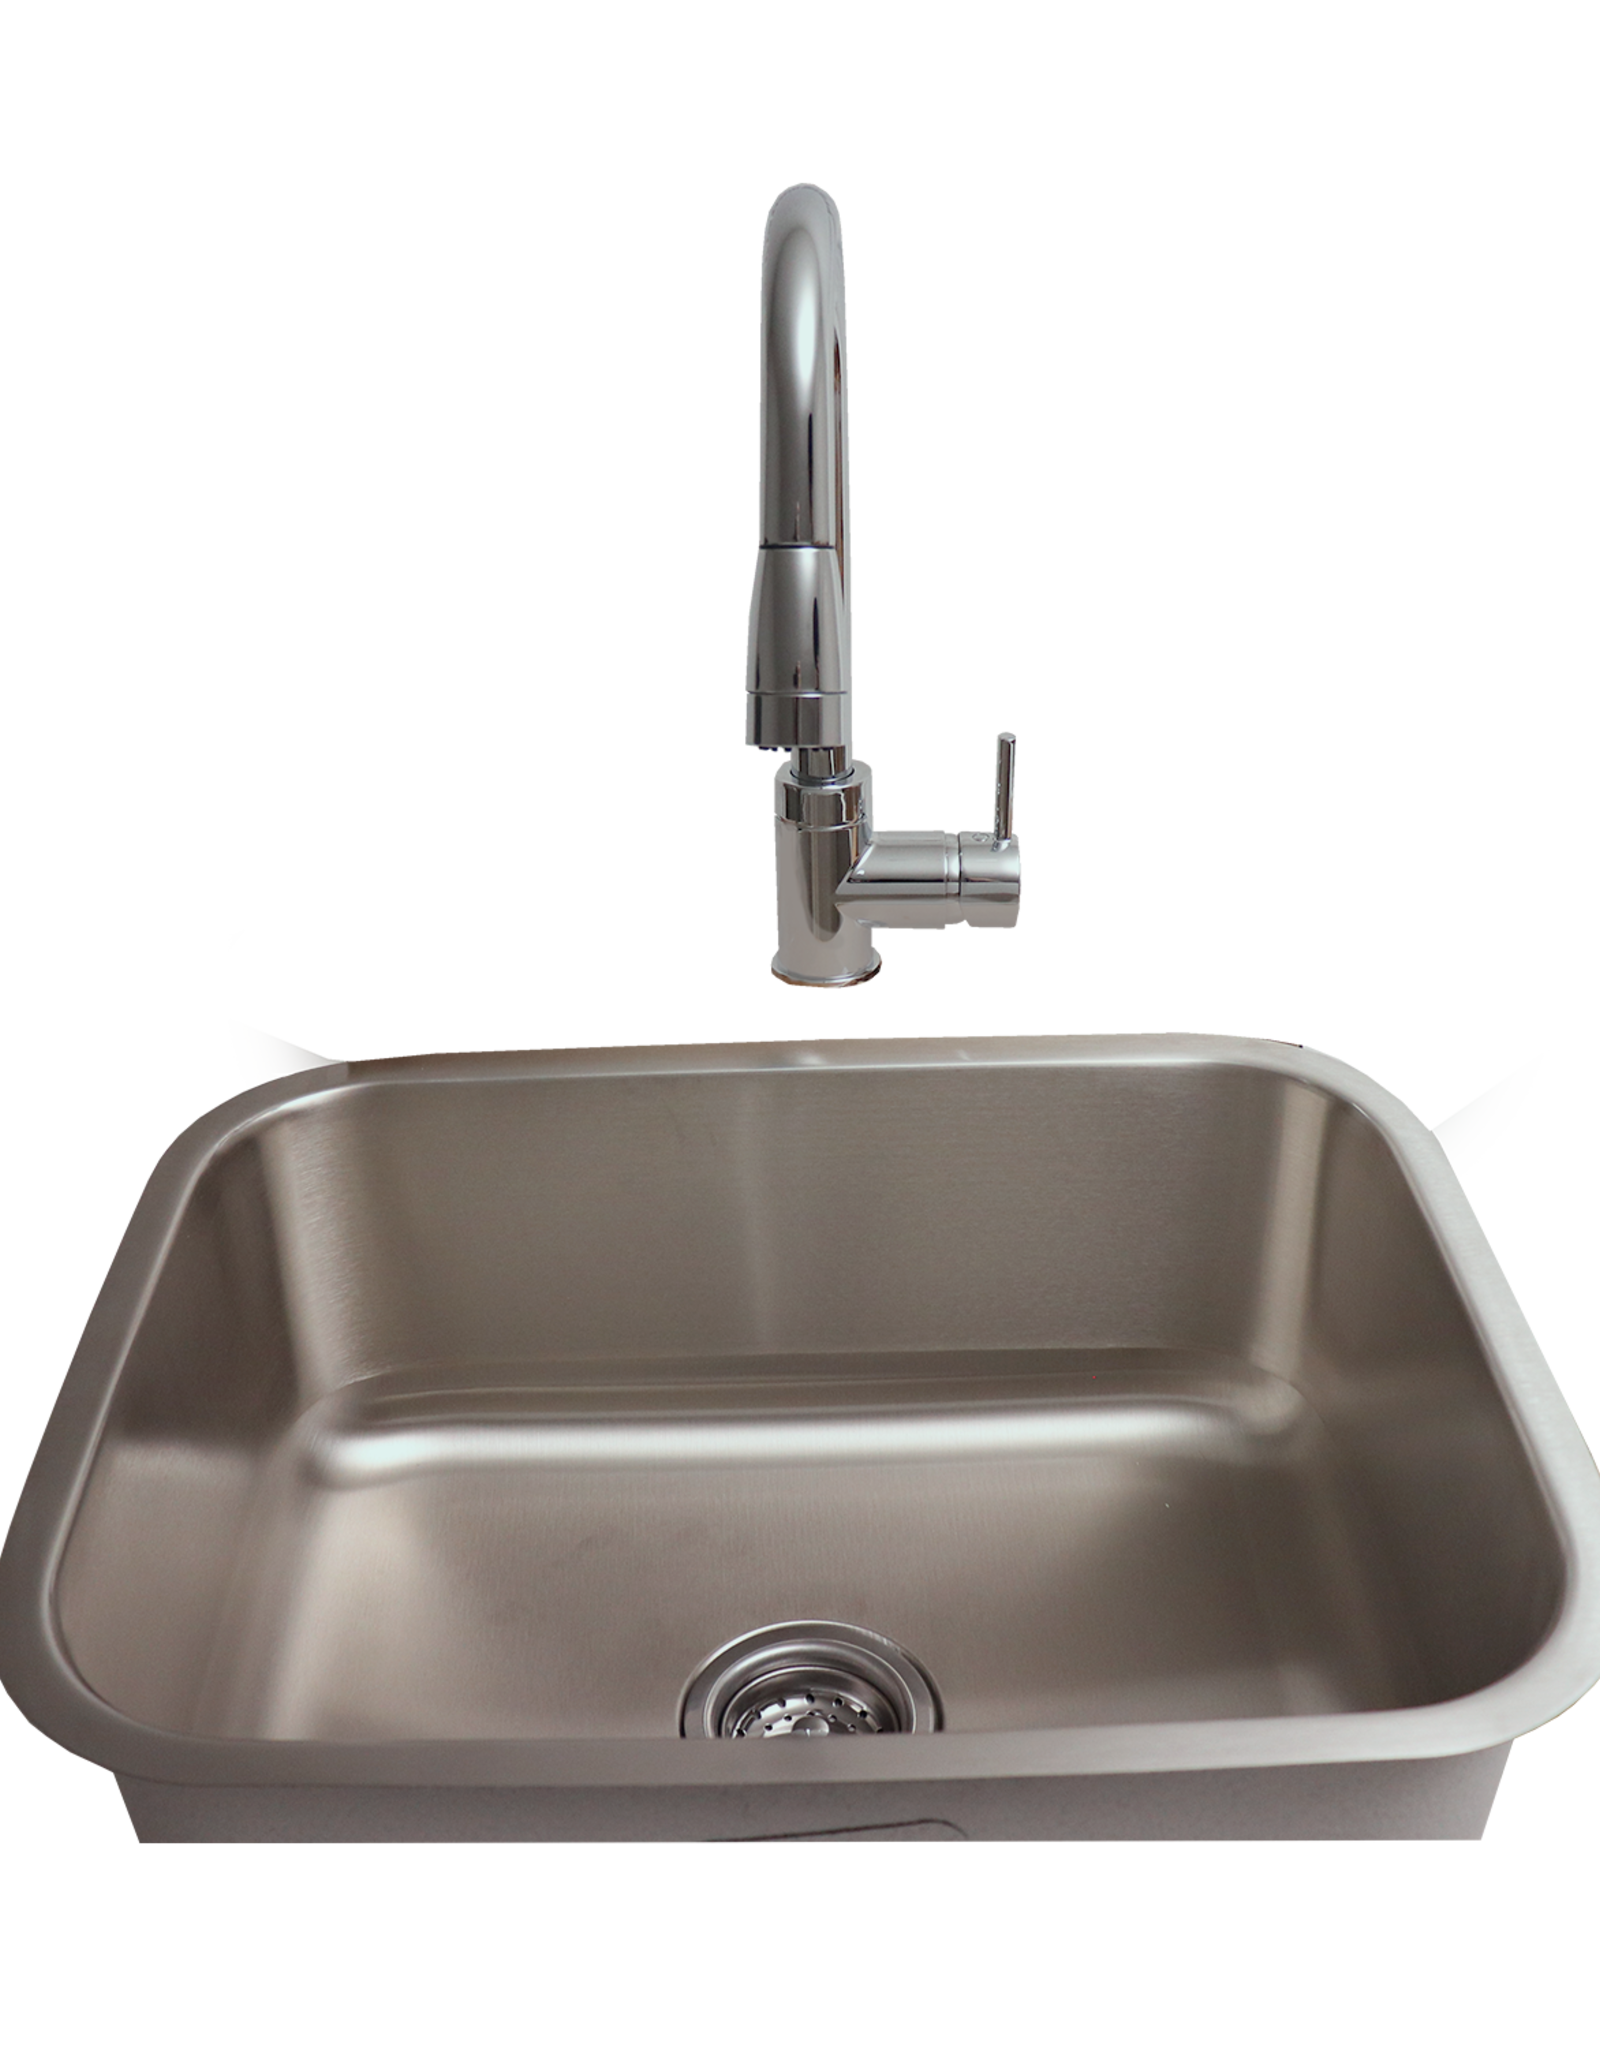 Renaissance Cooking Systems Renaissance Cooking Systems Stainless Undermount Sink & Faucet - RSNK2